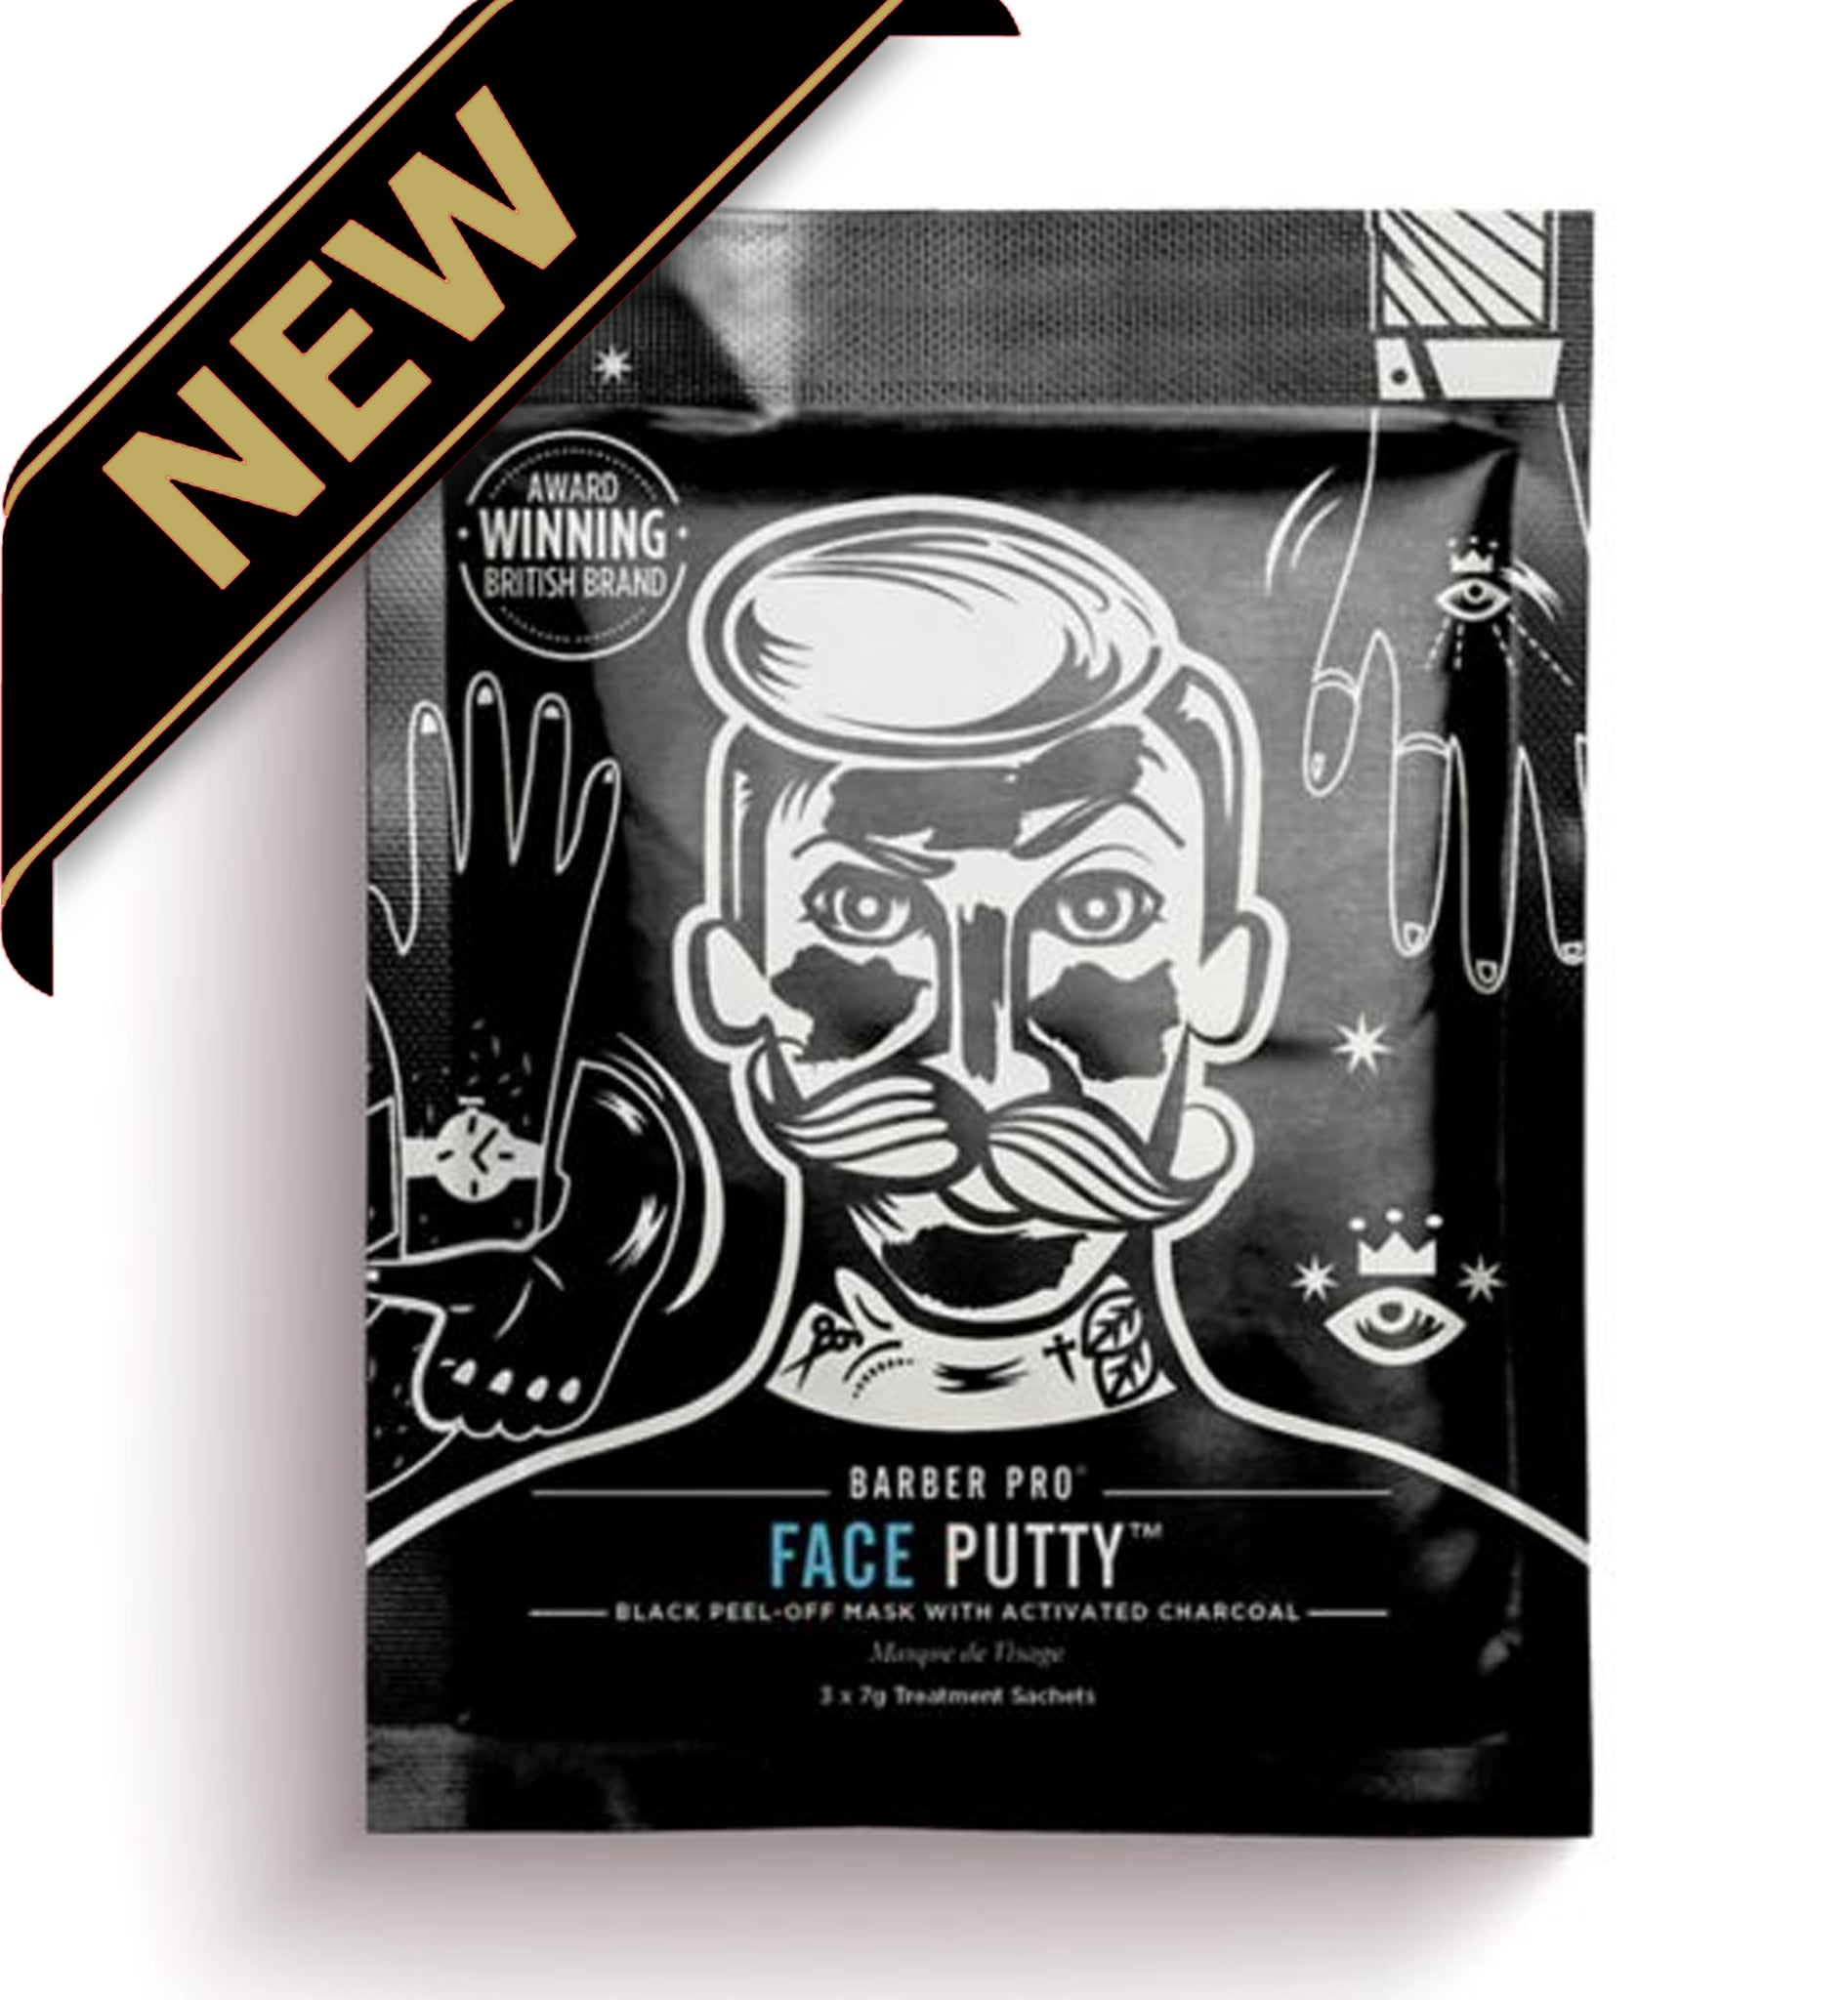 FACE PUTTY Peel-Off Mask with Activated Charcoal